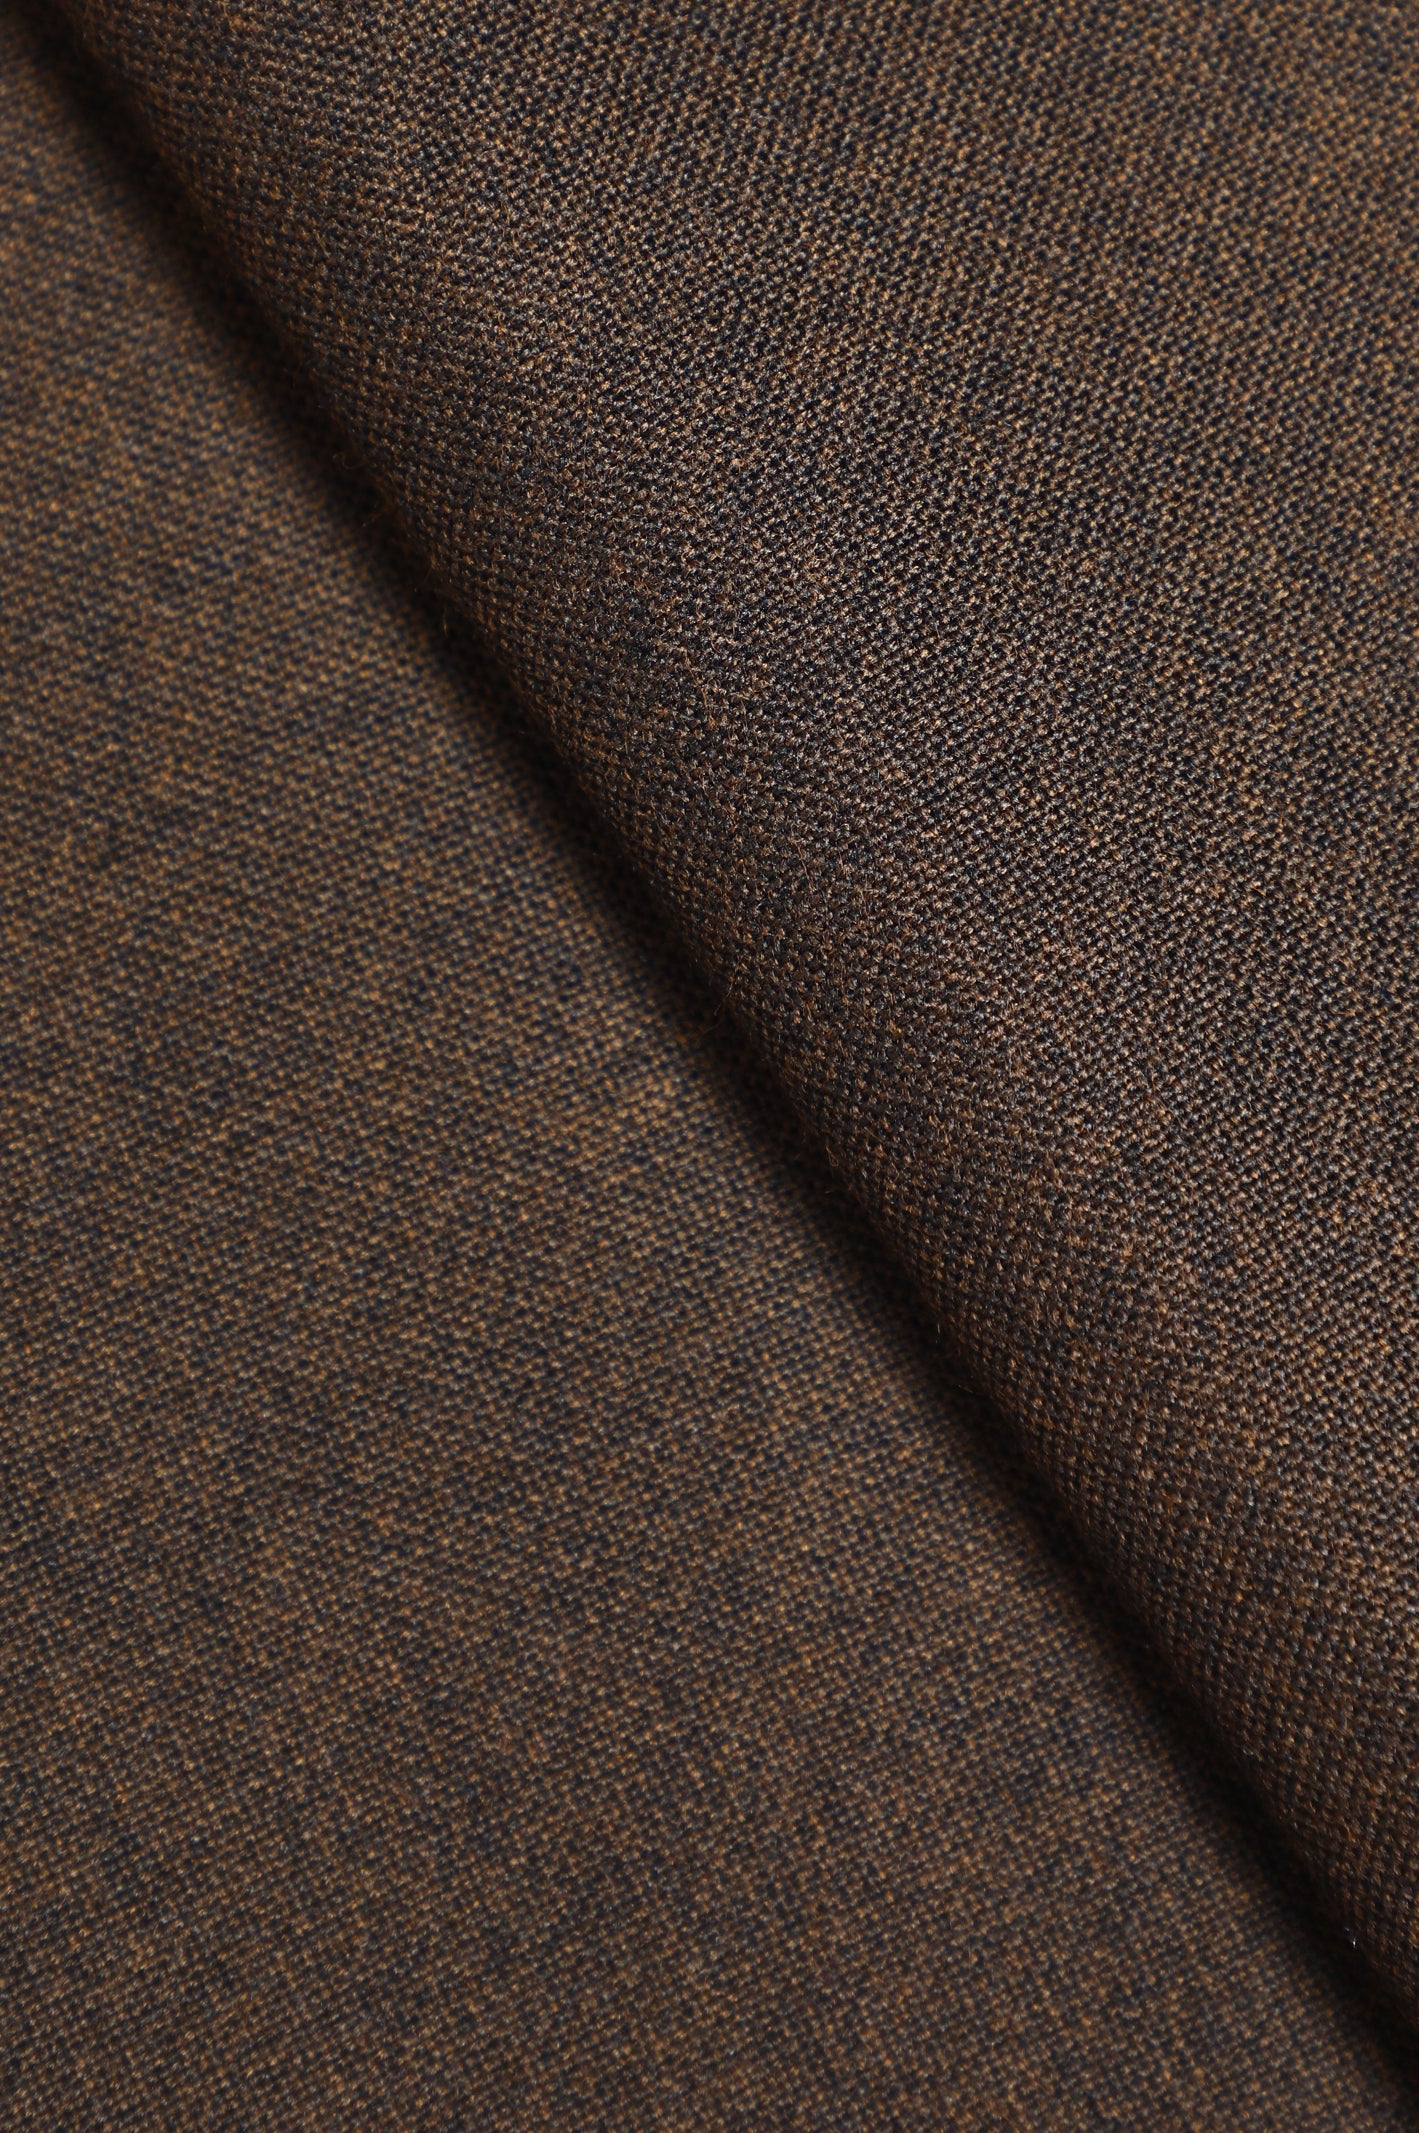 Unstitched Fabric for Men SKU: US0231-BROWN - Diners